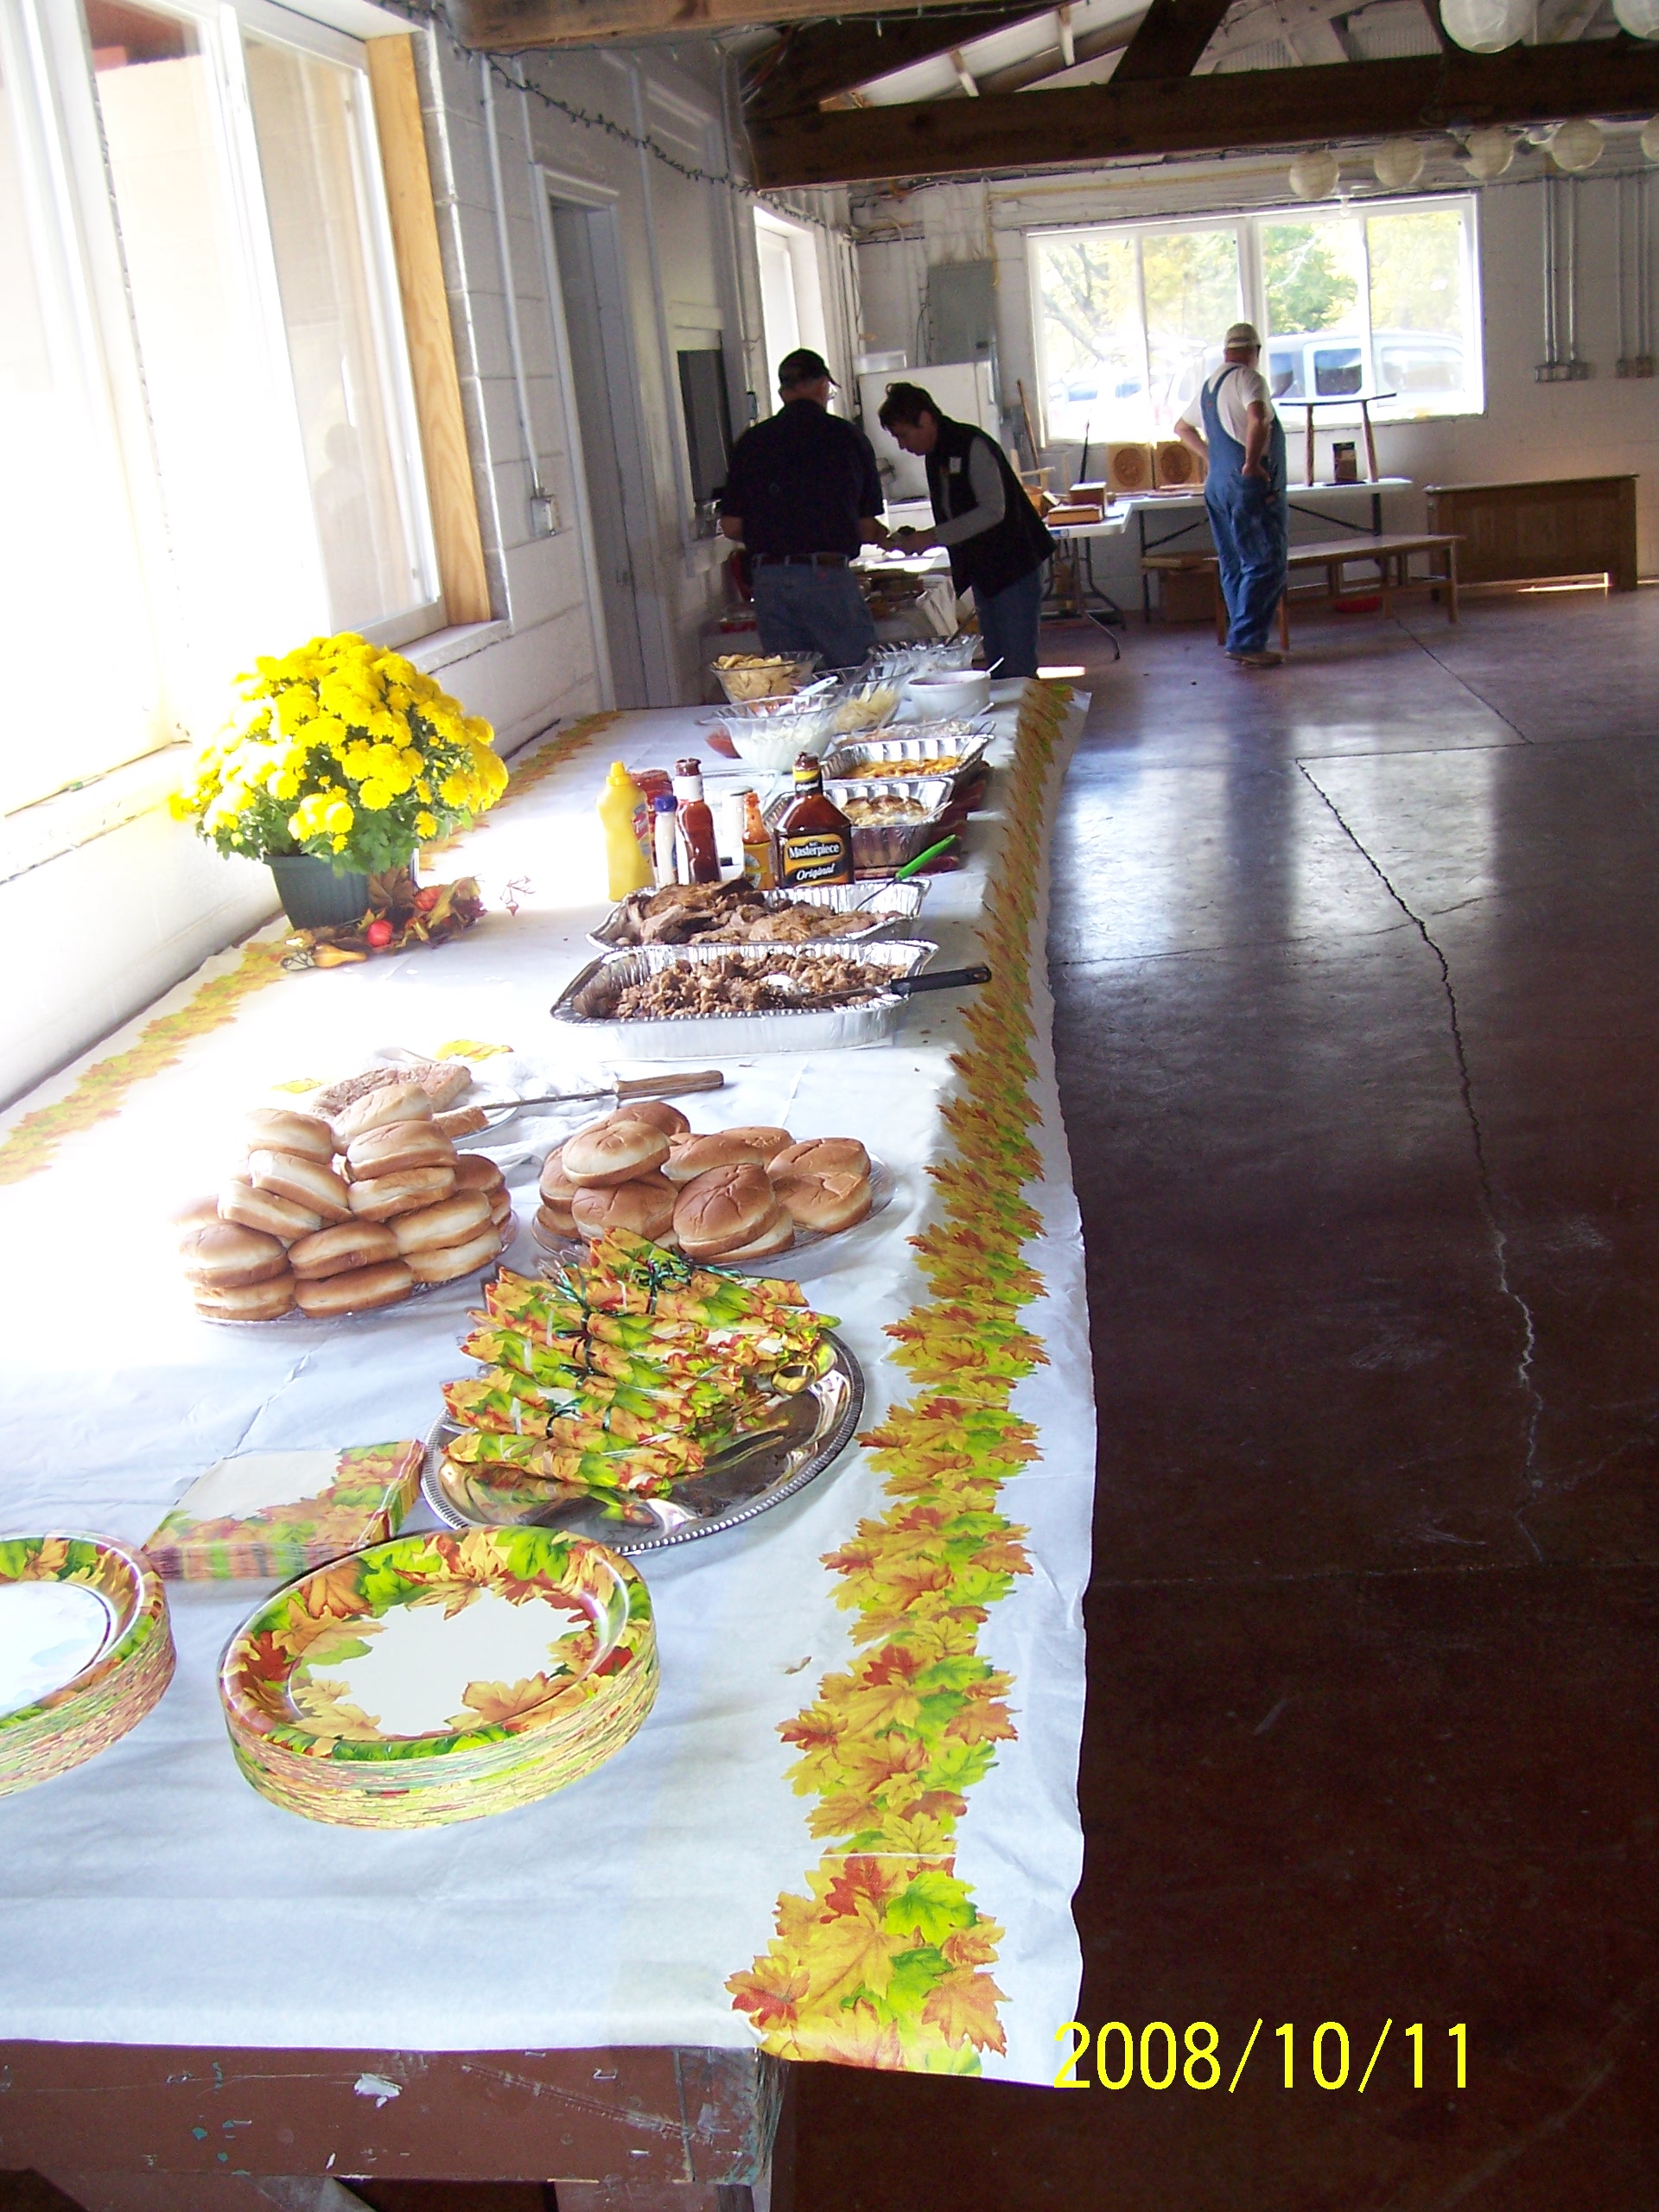 The food Table after most everyone ate.